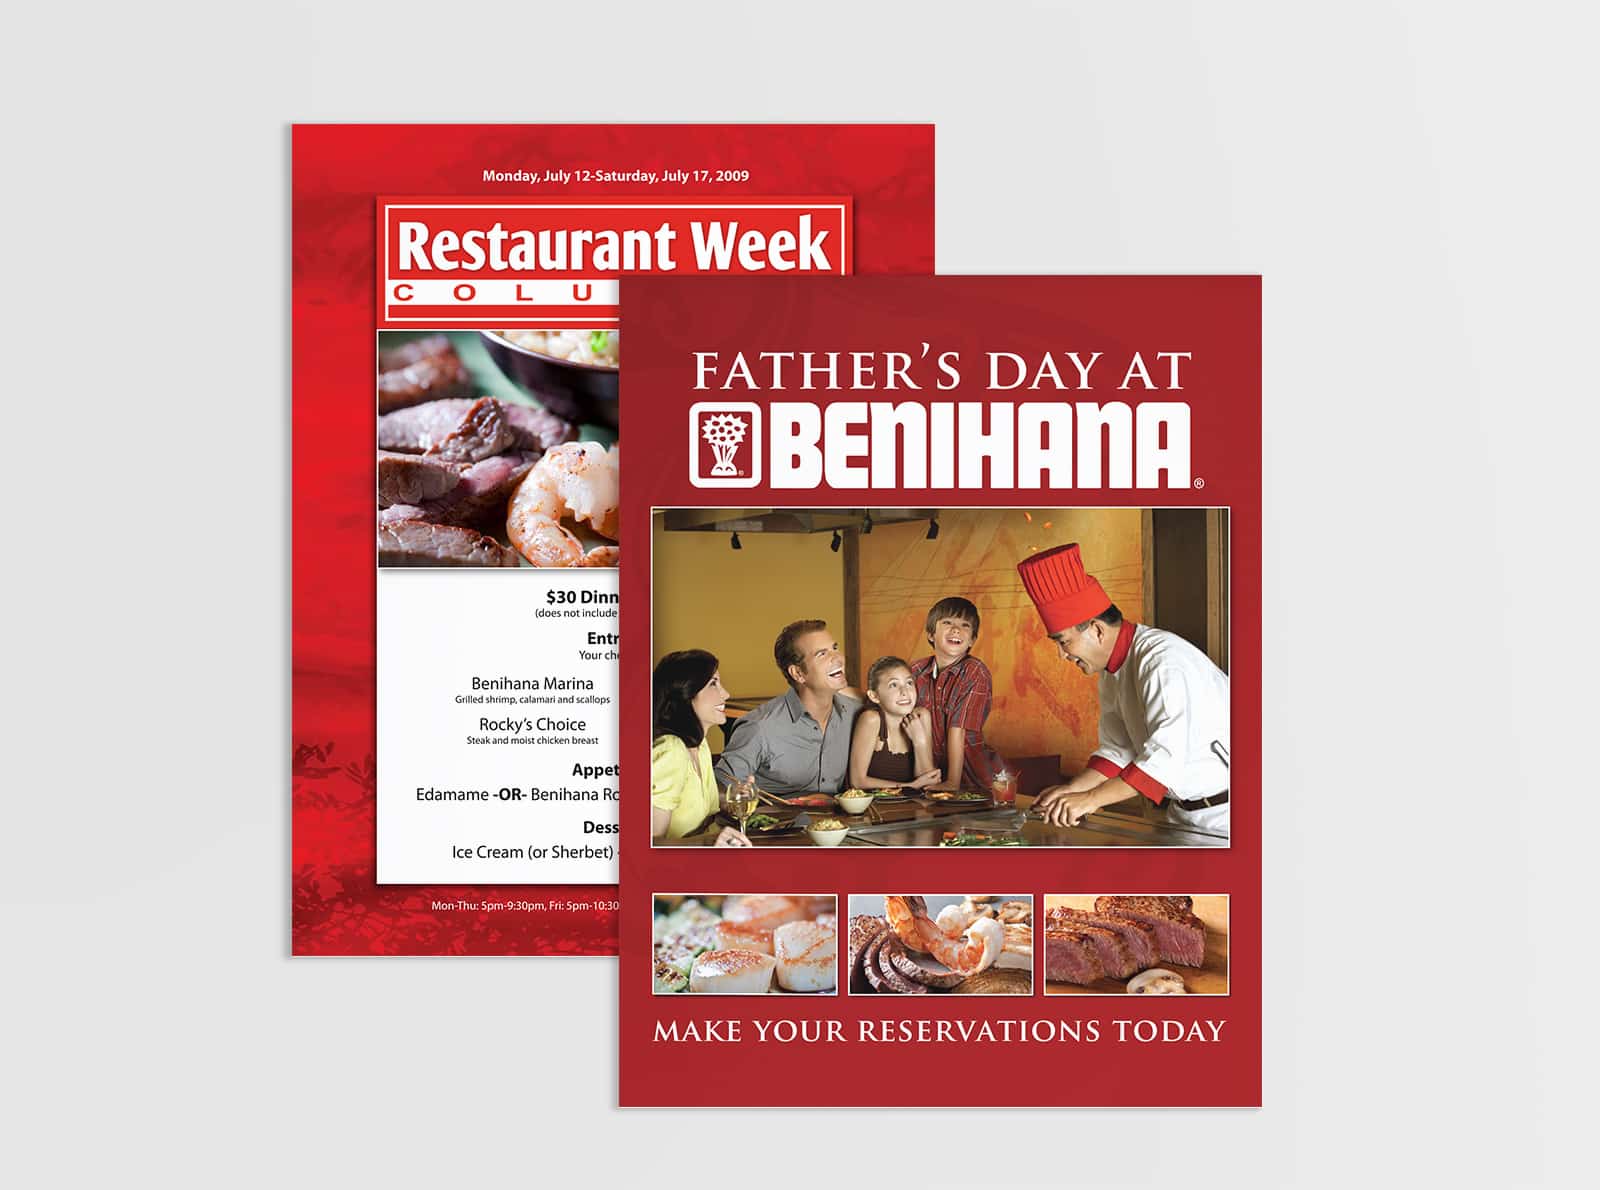 Benihana food brand design featuring Lunch Break and Complimentary Delivery flyers in red.